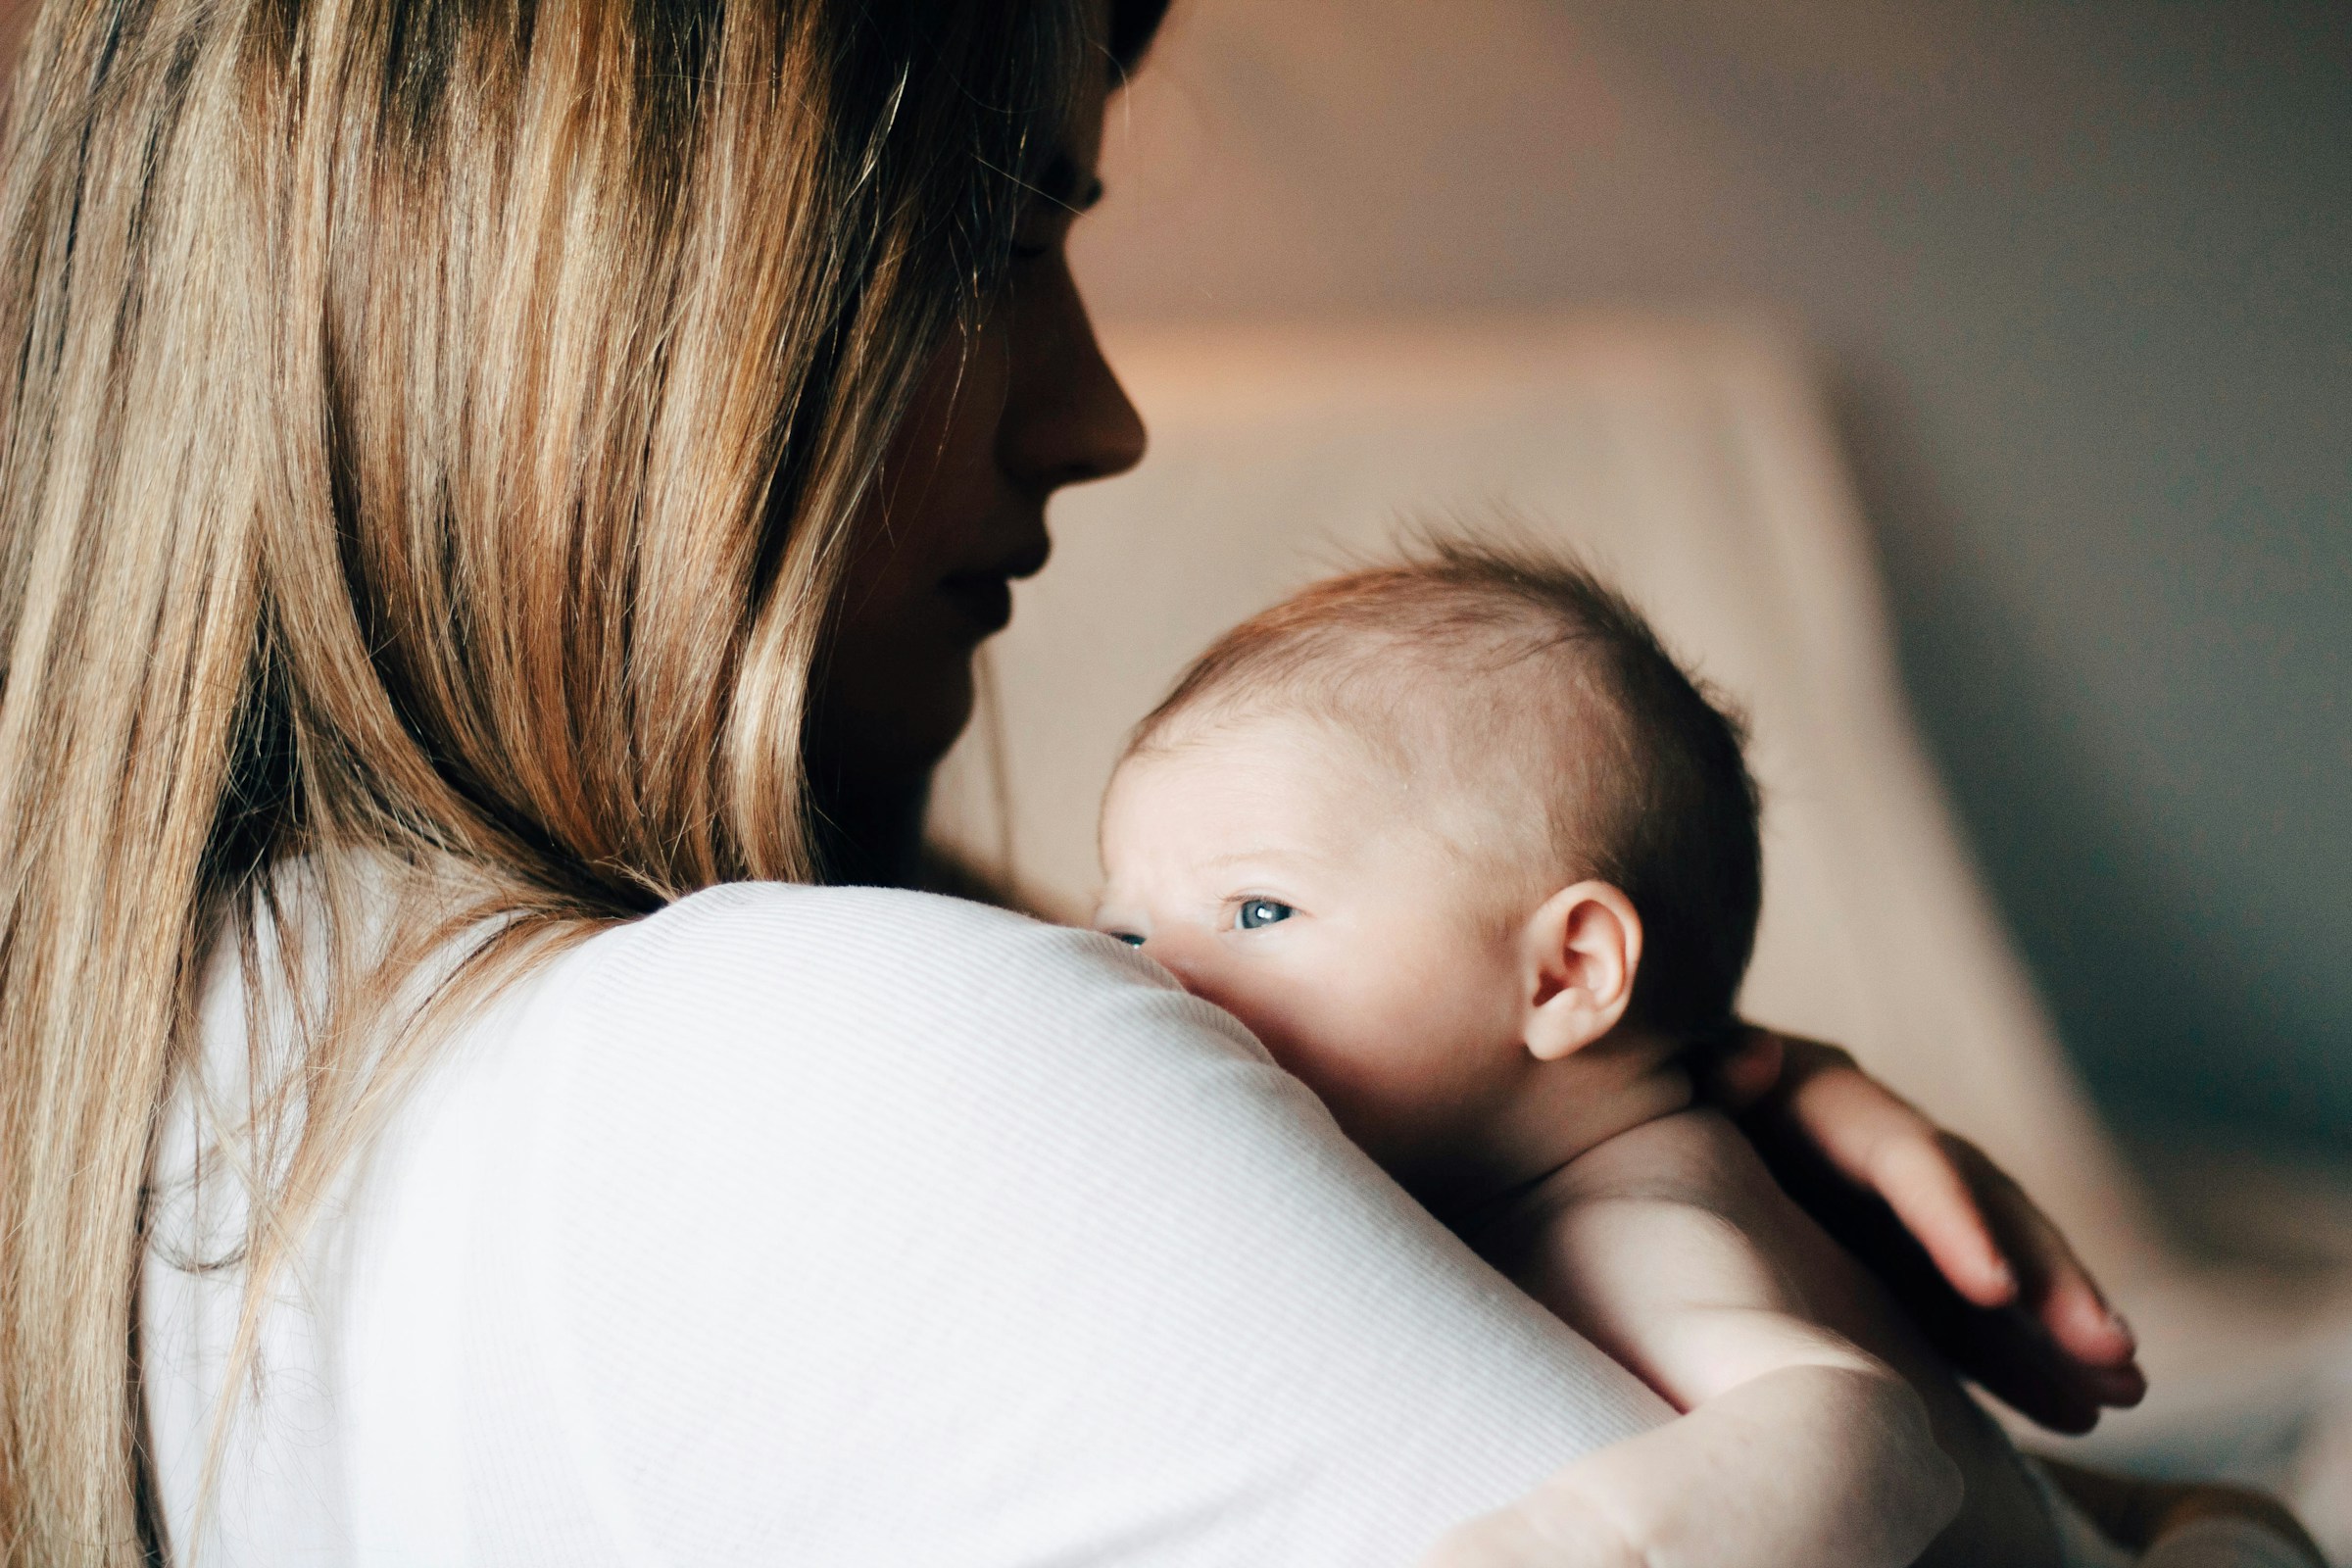 A mom holding her baby | Source: Unsplash